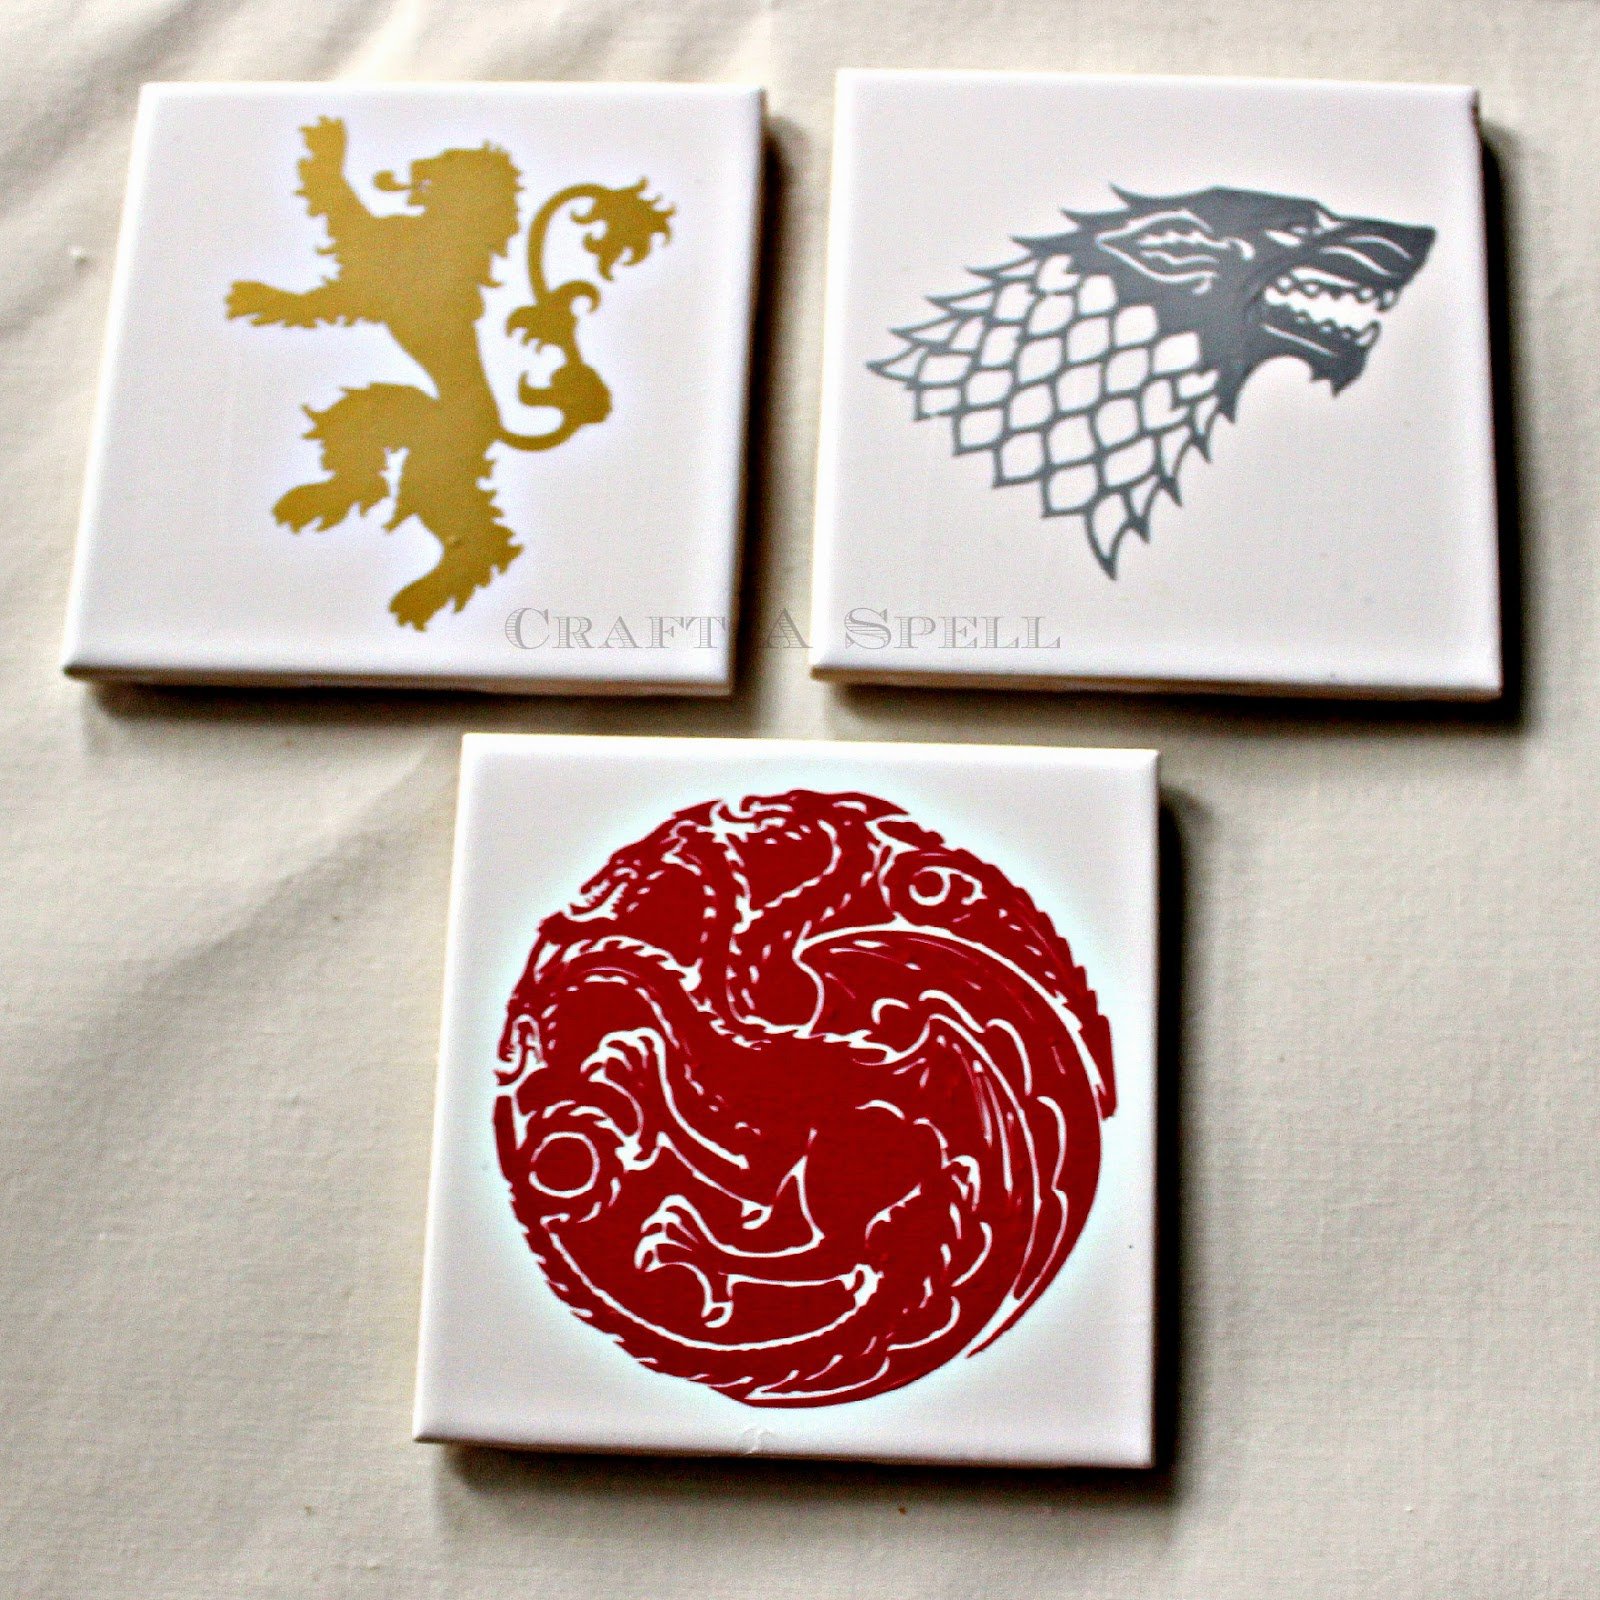 15 GAME OF THRONES CRAFTS AND DIYS